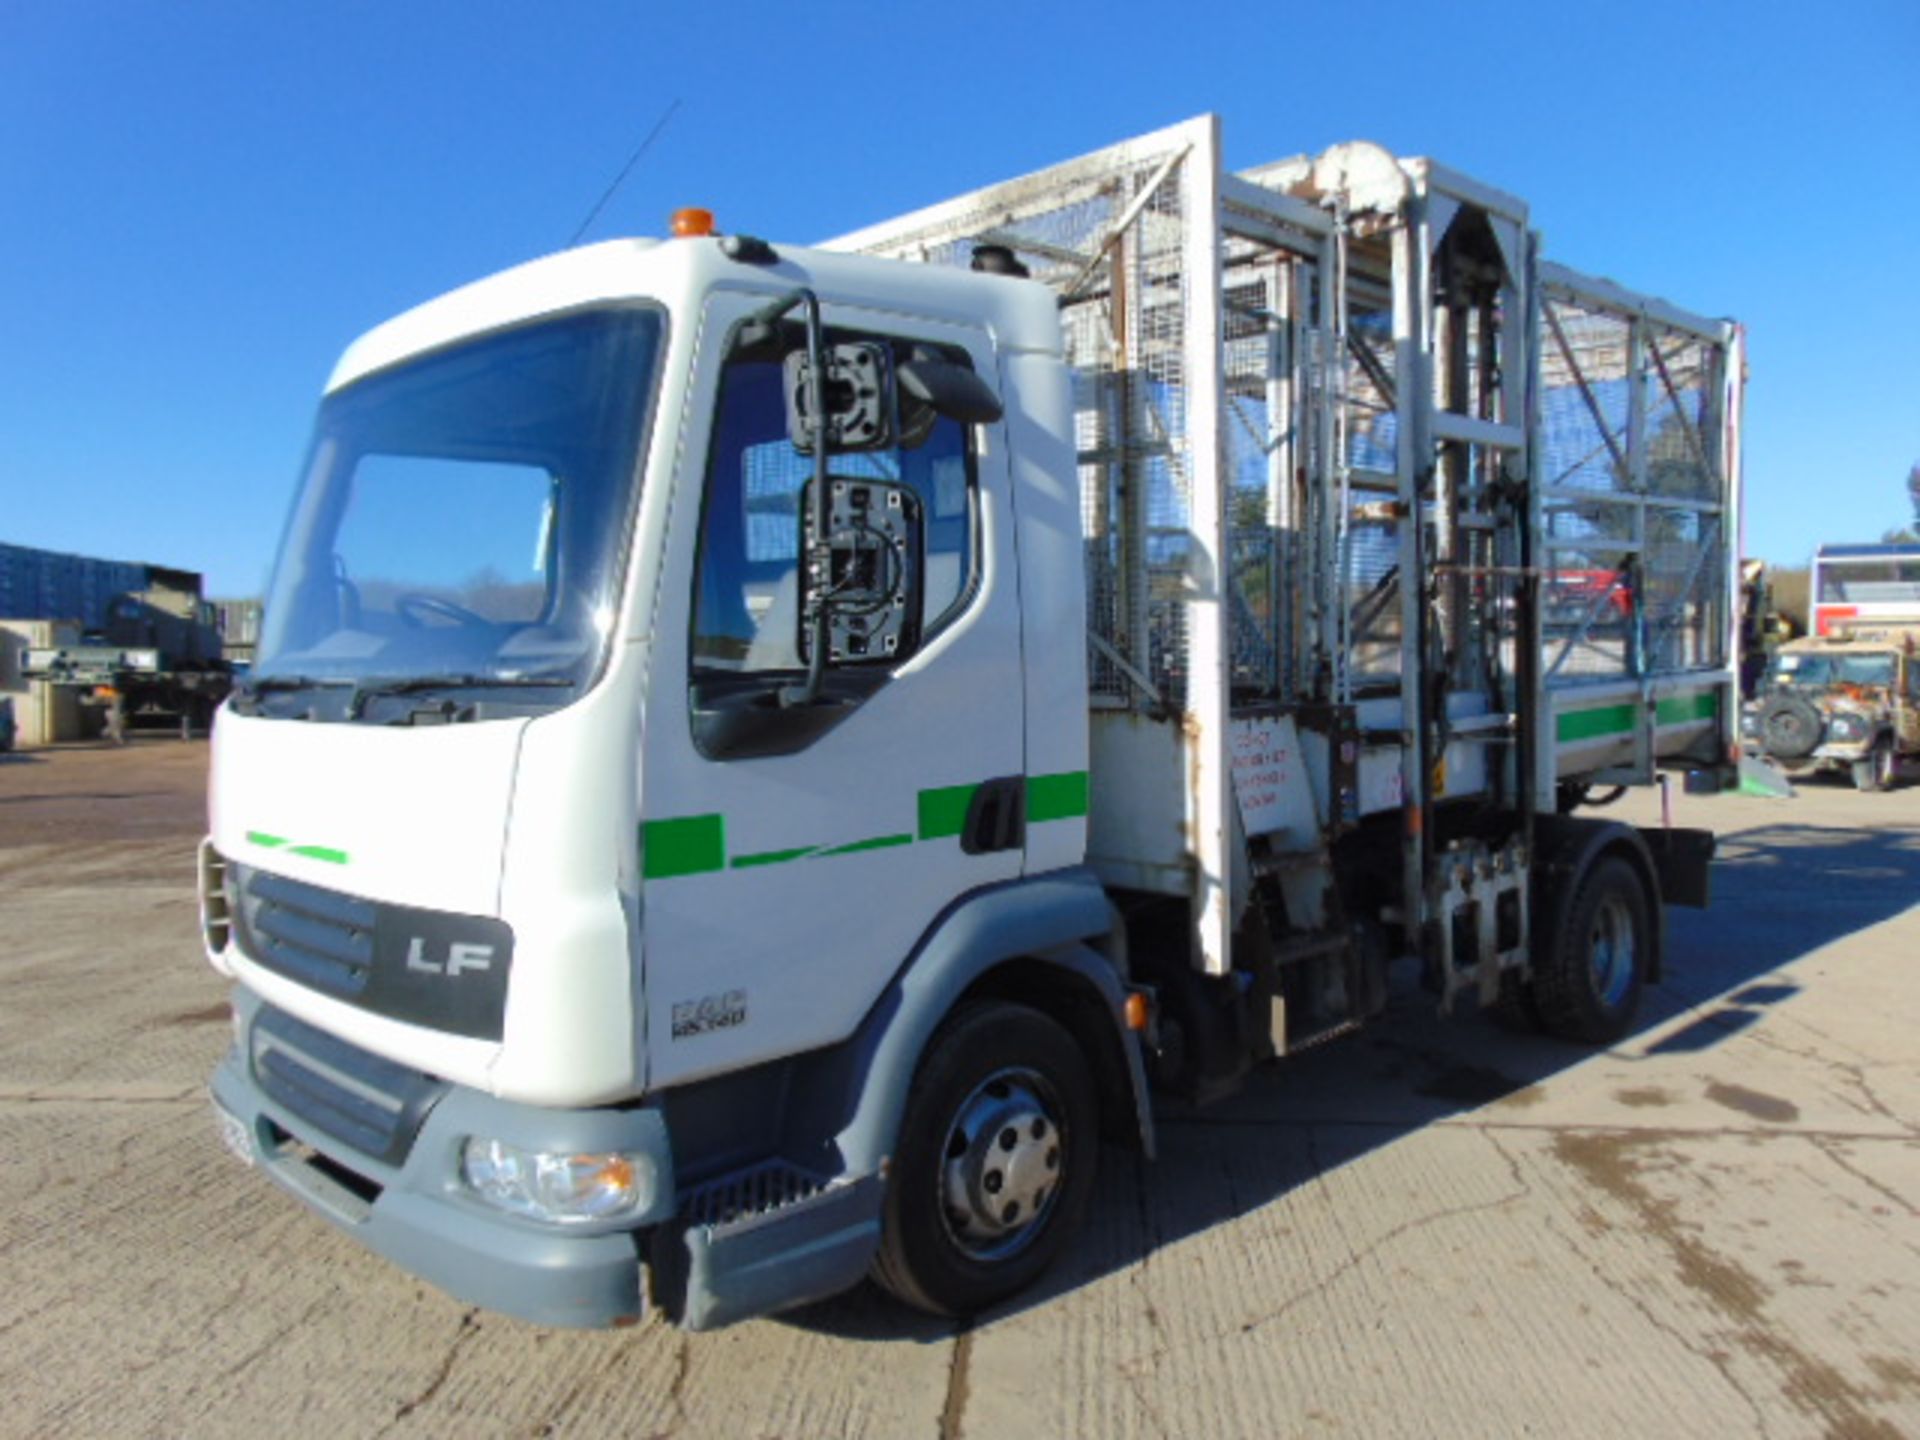 2008 DAF LF 45.140 C/W Refuse Cage, Rear Tipping Body and Side Bin Lift - Image 3 of 26